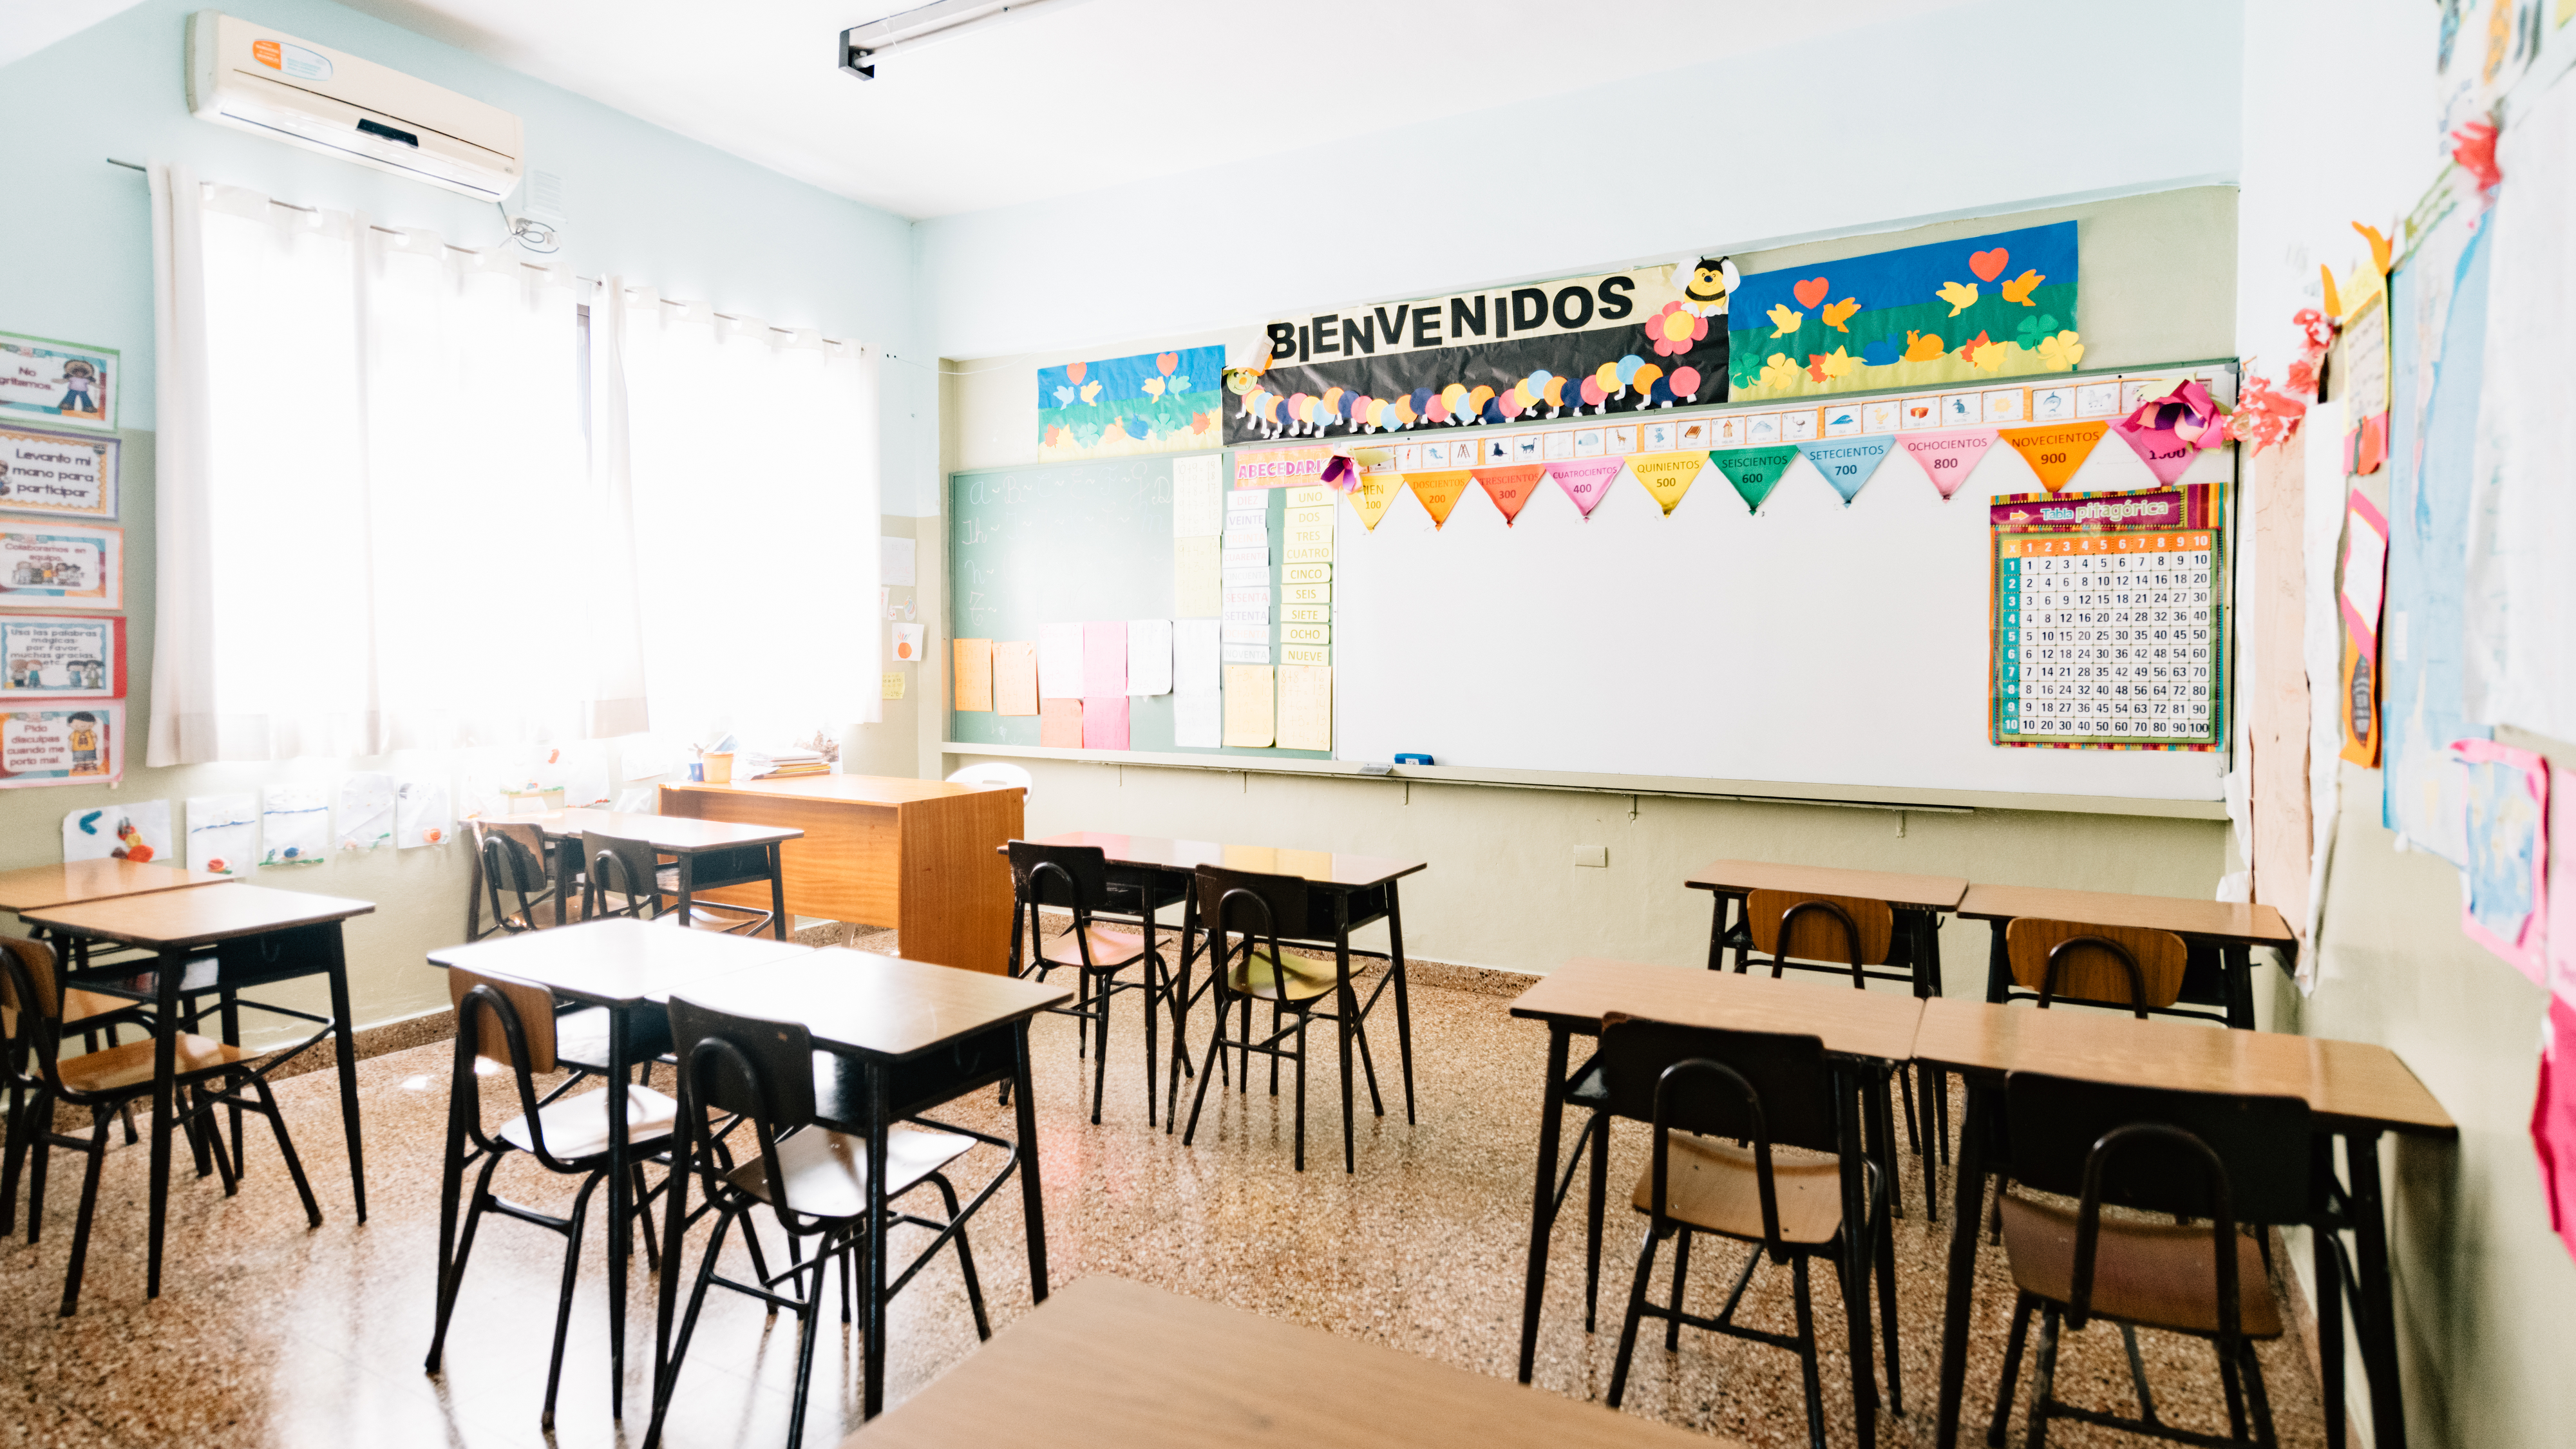 A decorated classroom